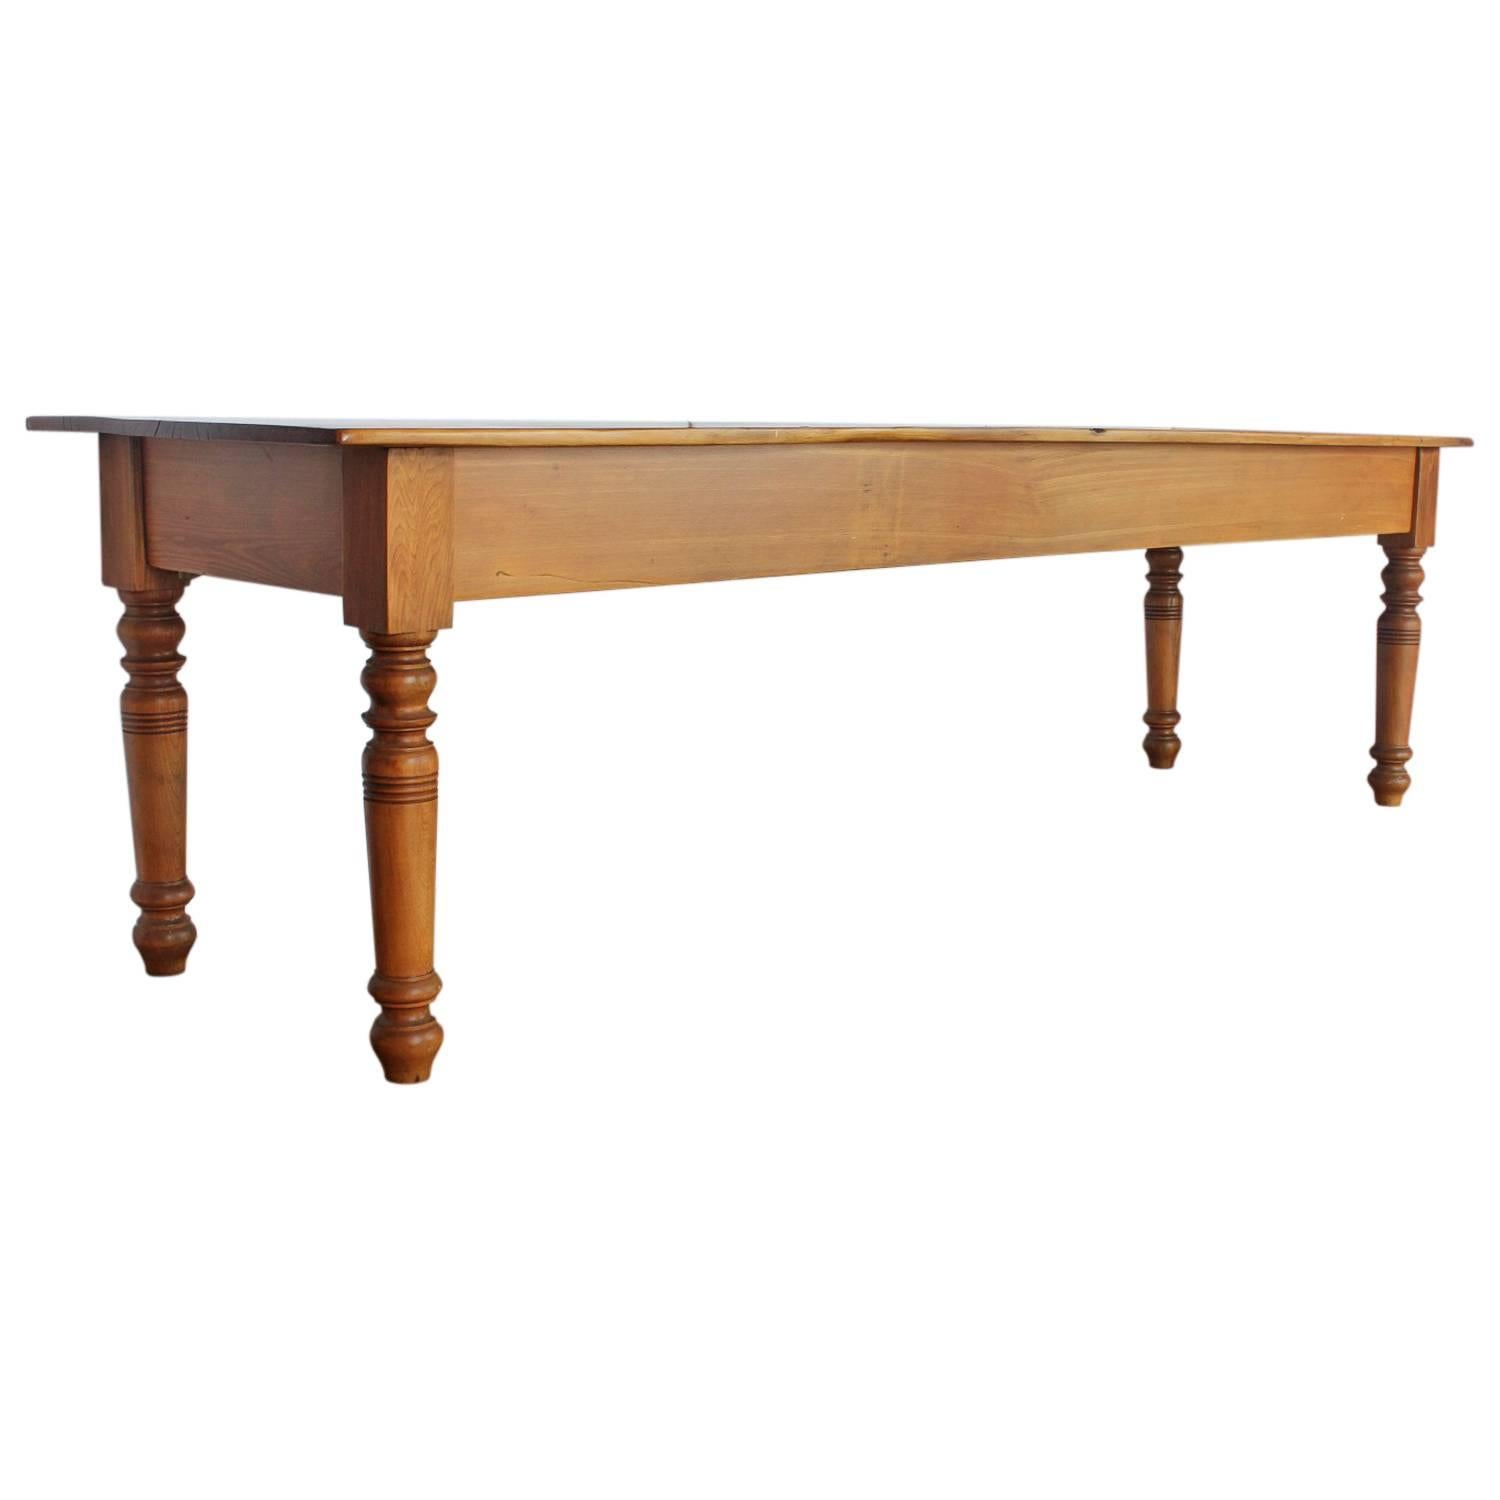 Early 20th Century American Department Store Display Table For Sale